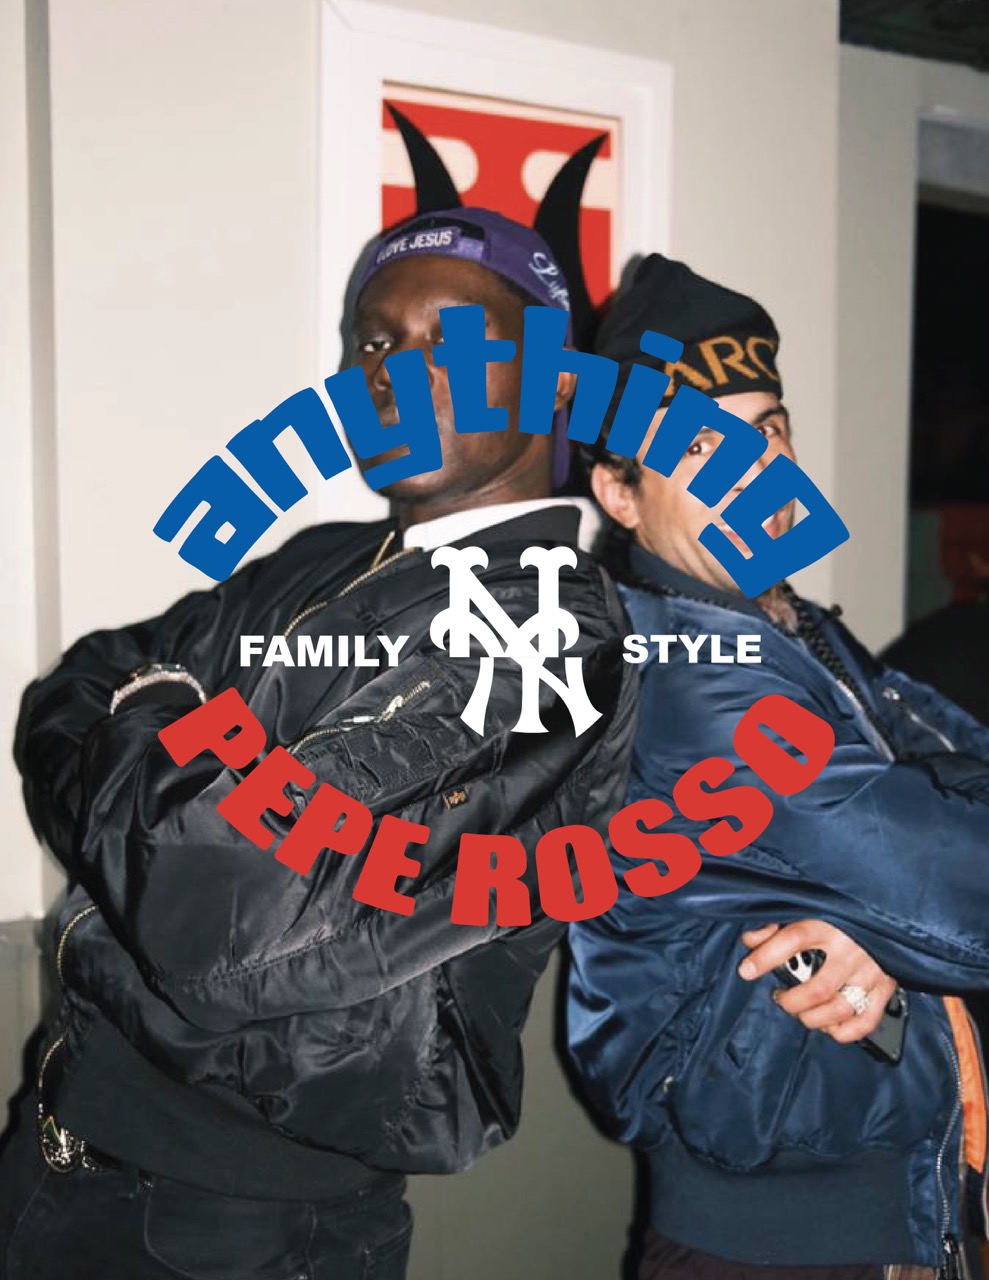 PEPE ROSSO x aNYthing “FAMILY STYLE”